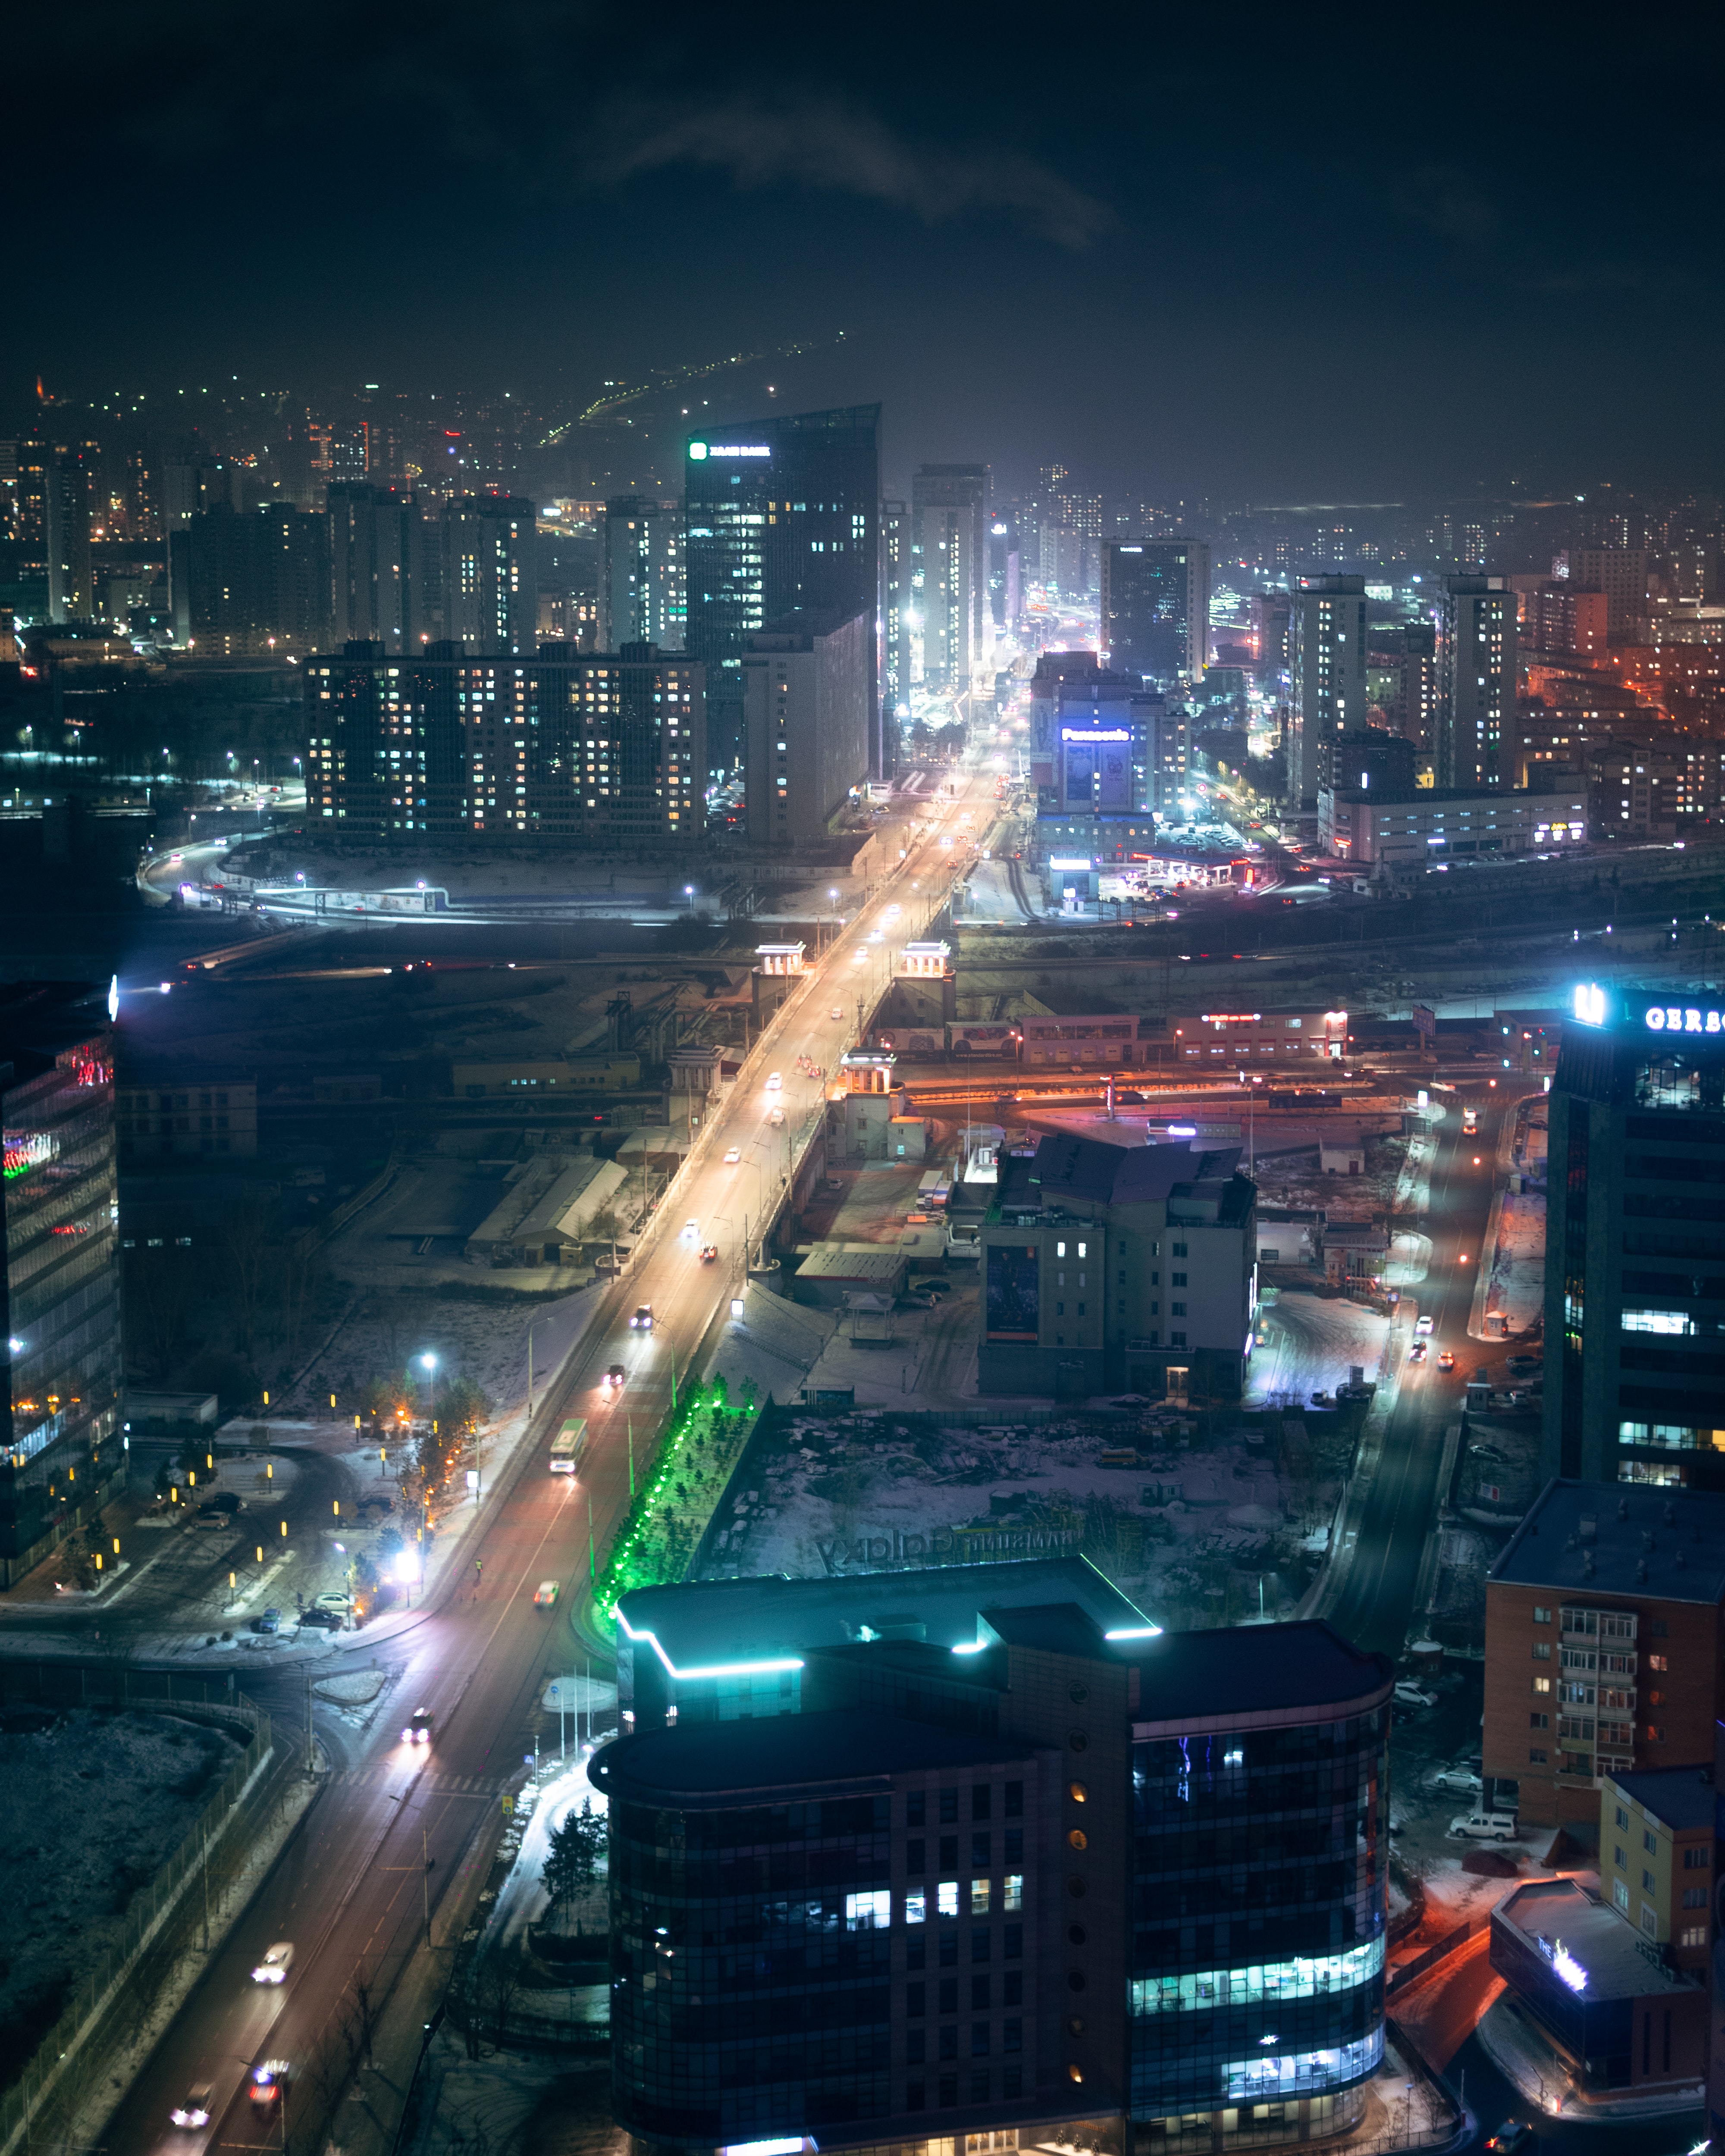 lights, roads, building, cities, streets, view from above, night city